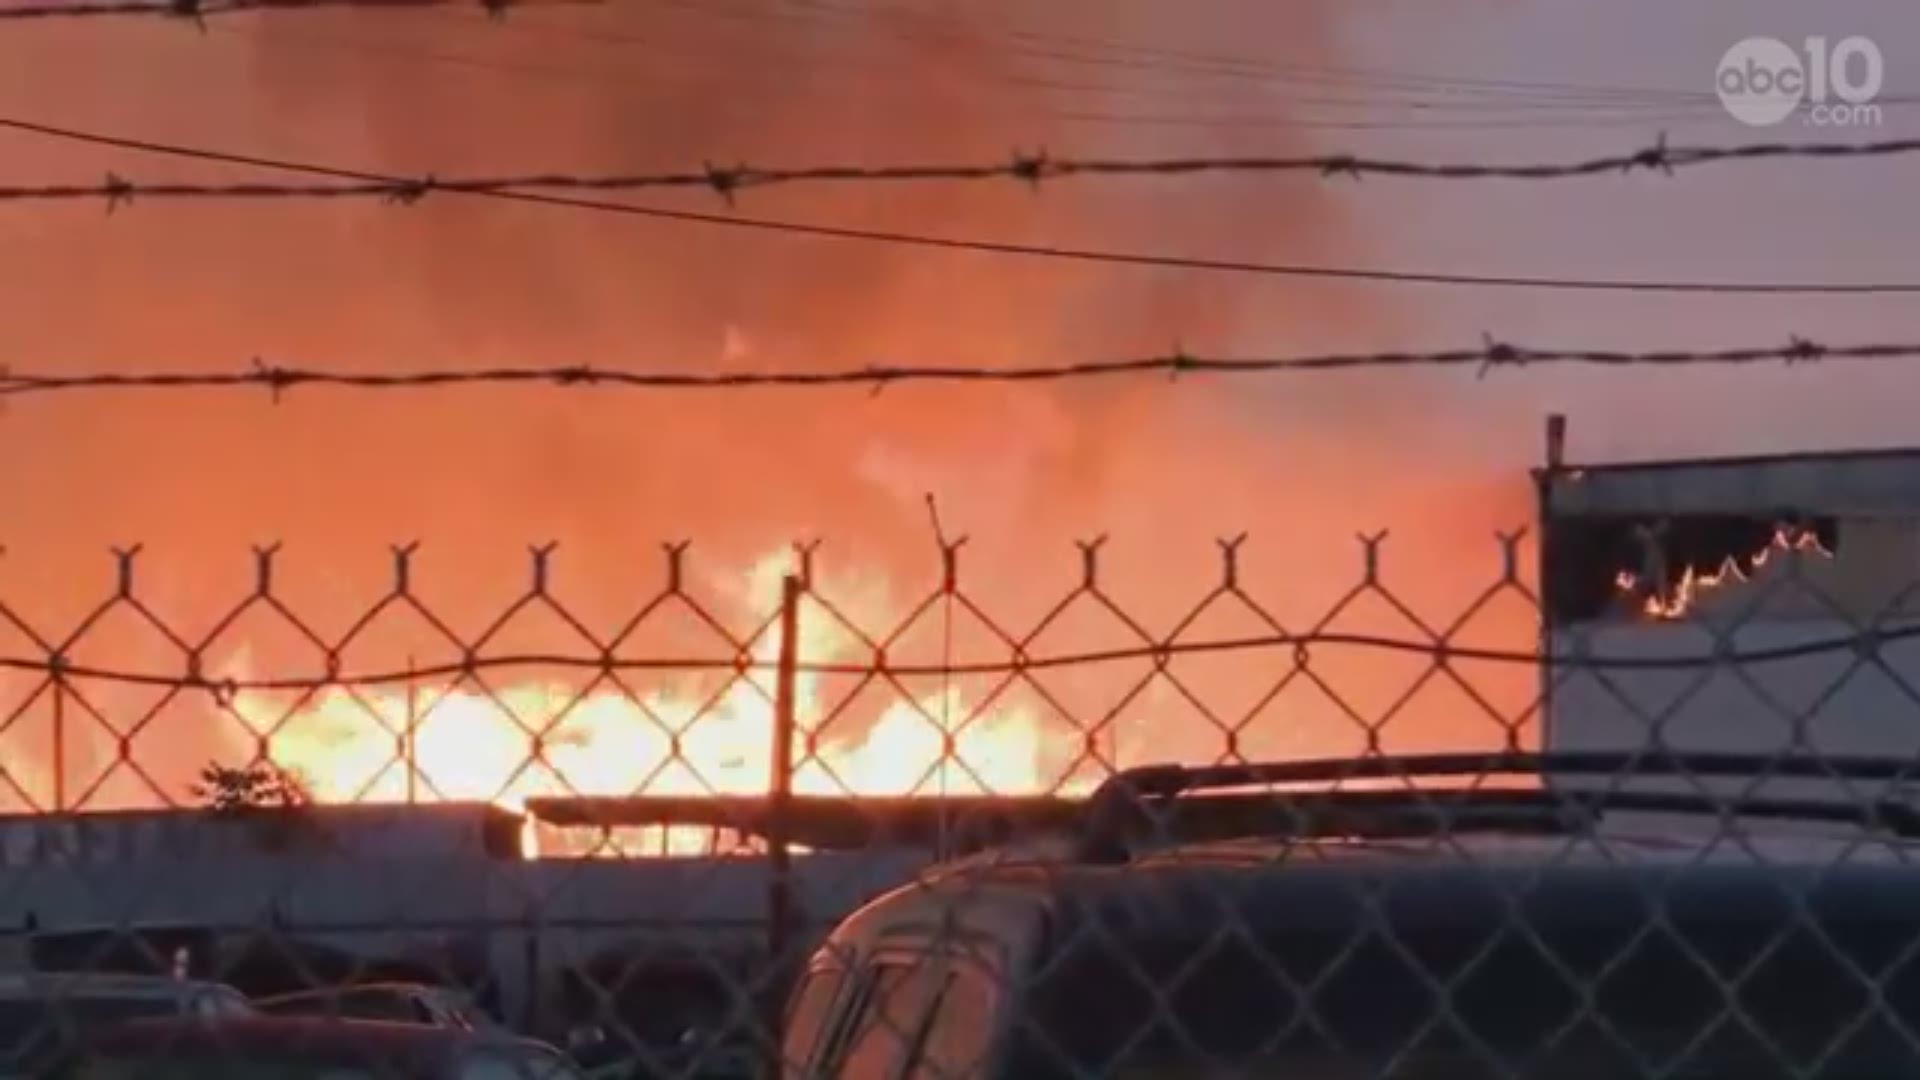 Firefighters faced big flames as they battled a fire in Stockton that burned through a pallet yard. Brittany Begley and Kurt Rivera give updates from the fire.